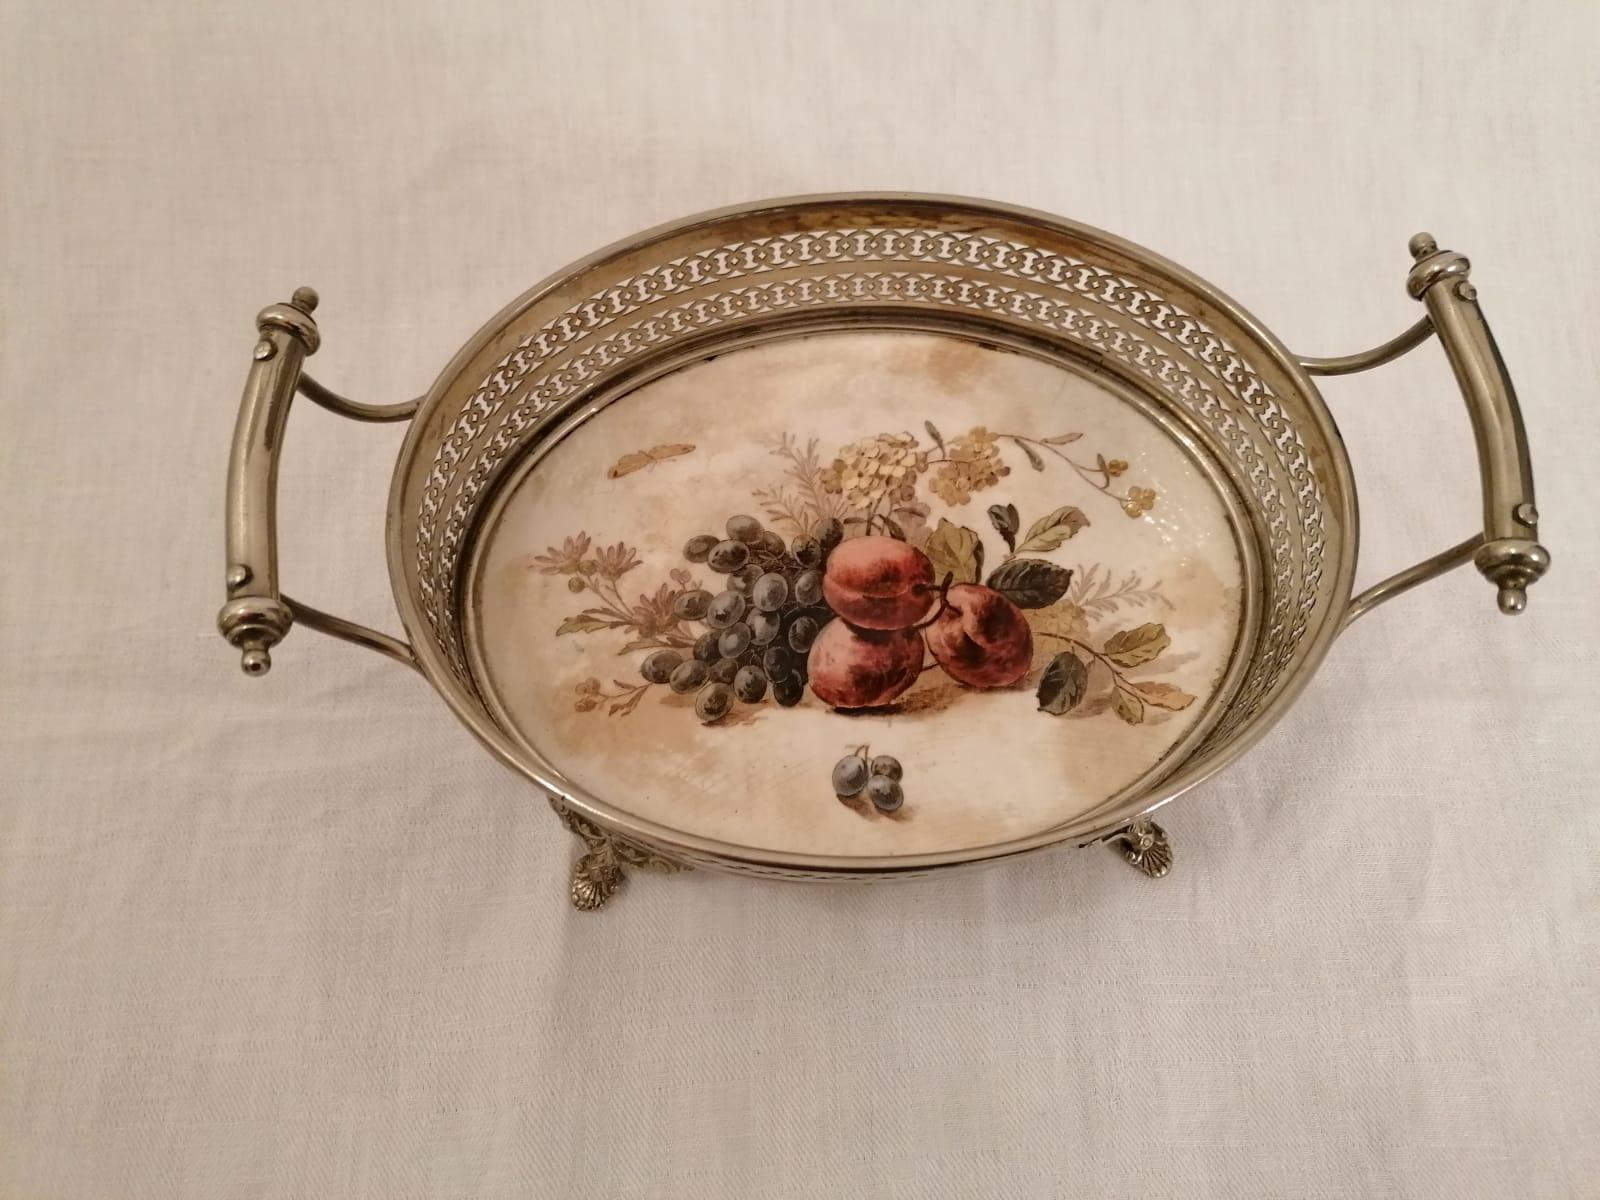 Brass frame nickel-plated with ceramic base showing fruits motif. Made in Austria in the late 1920s.